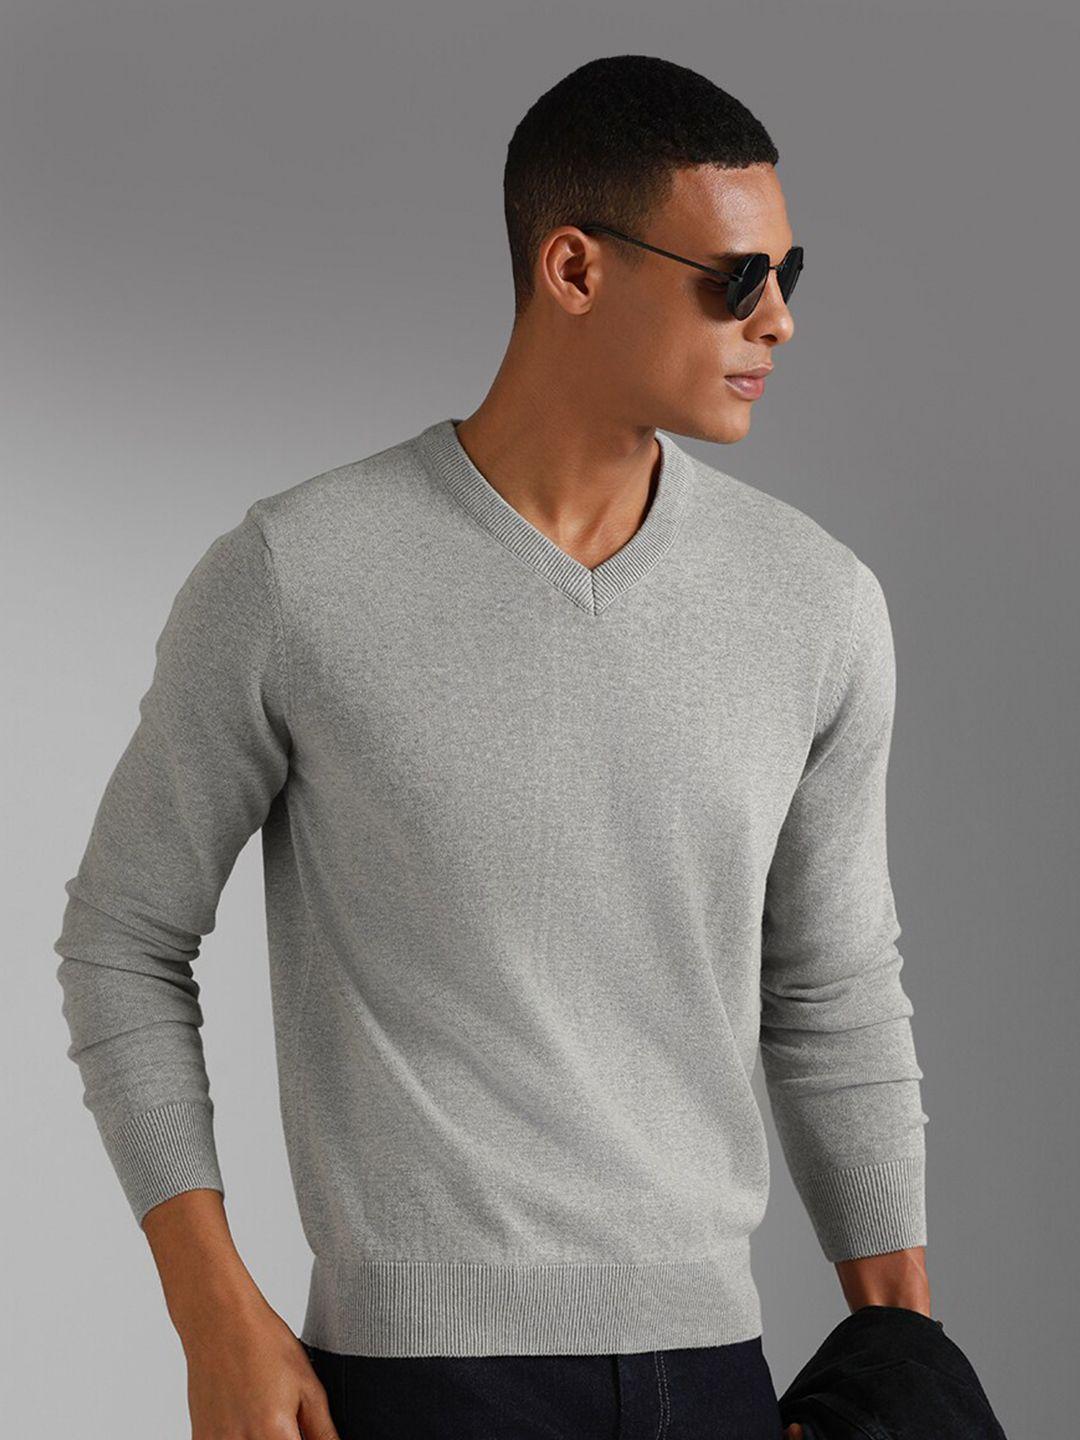 high-star-v-neck-long-sleeves-cotton-pullover-sweater